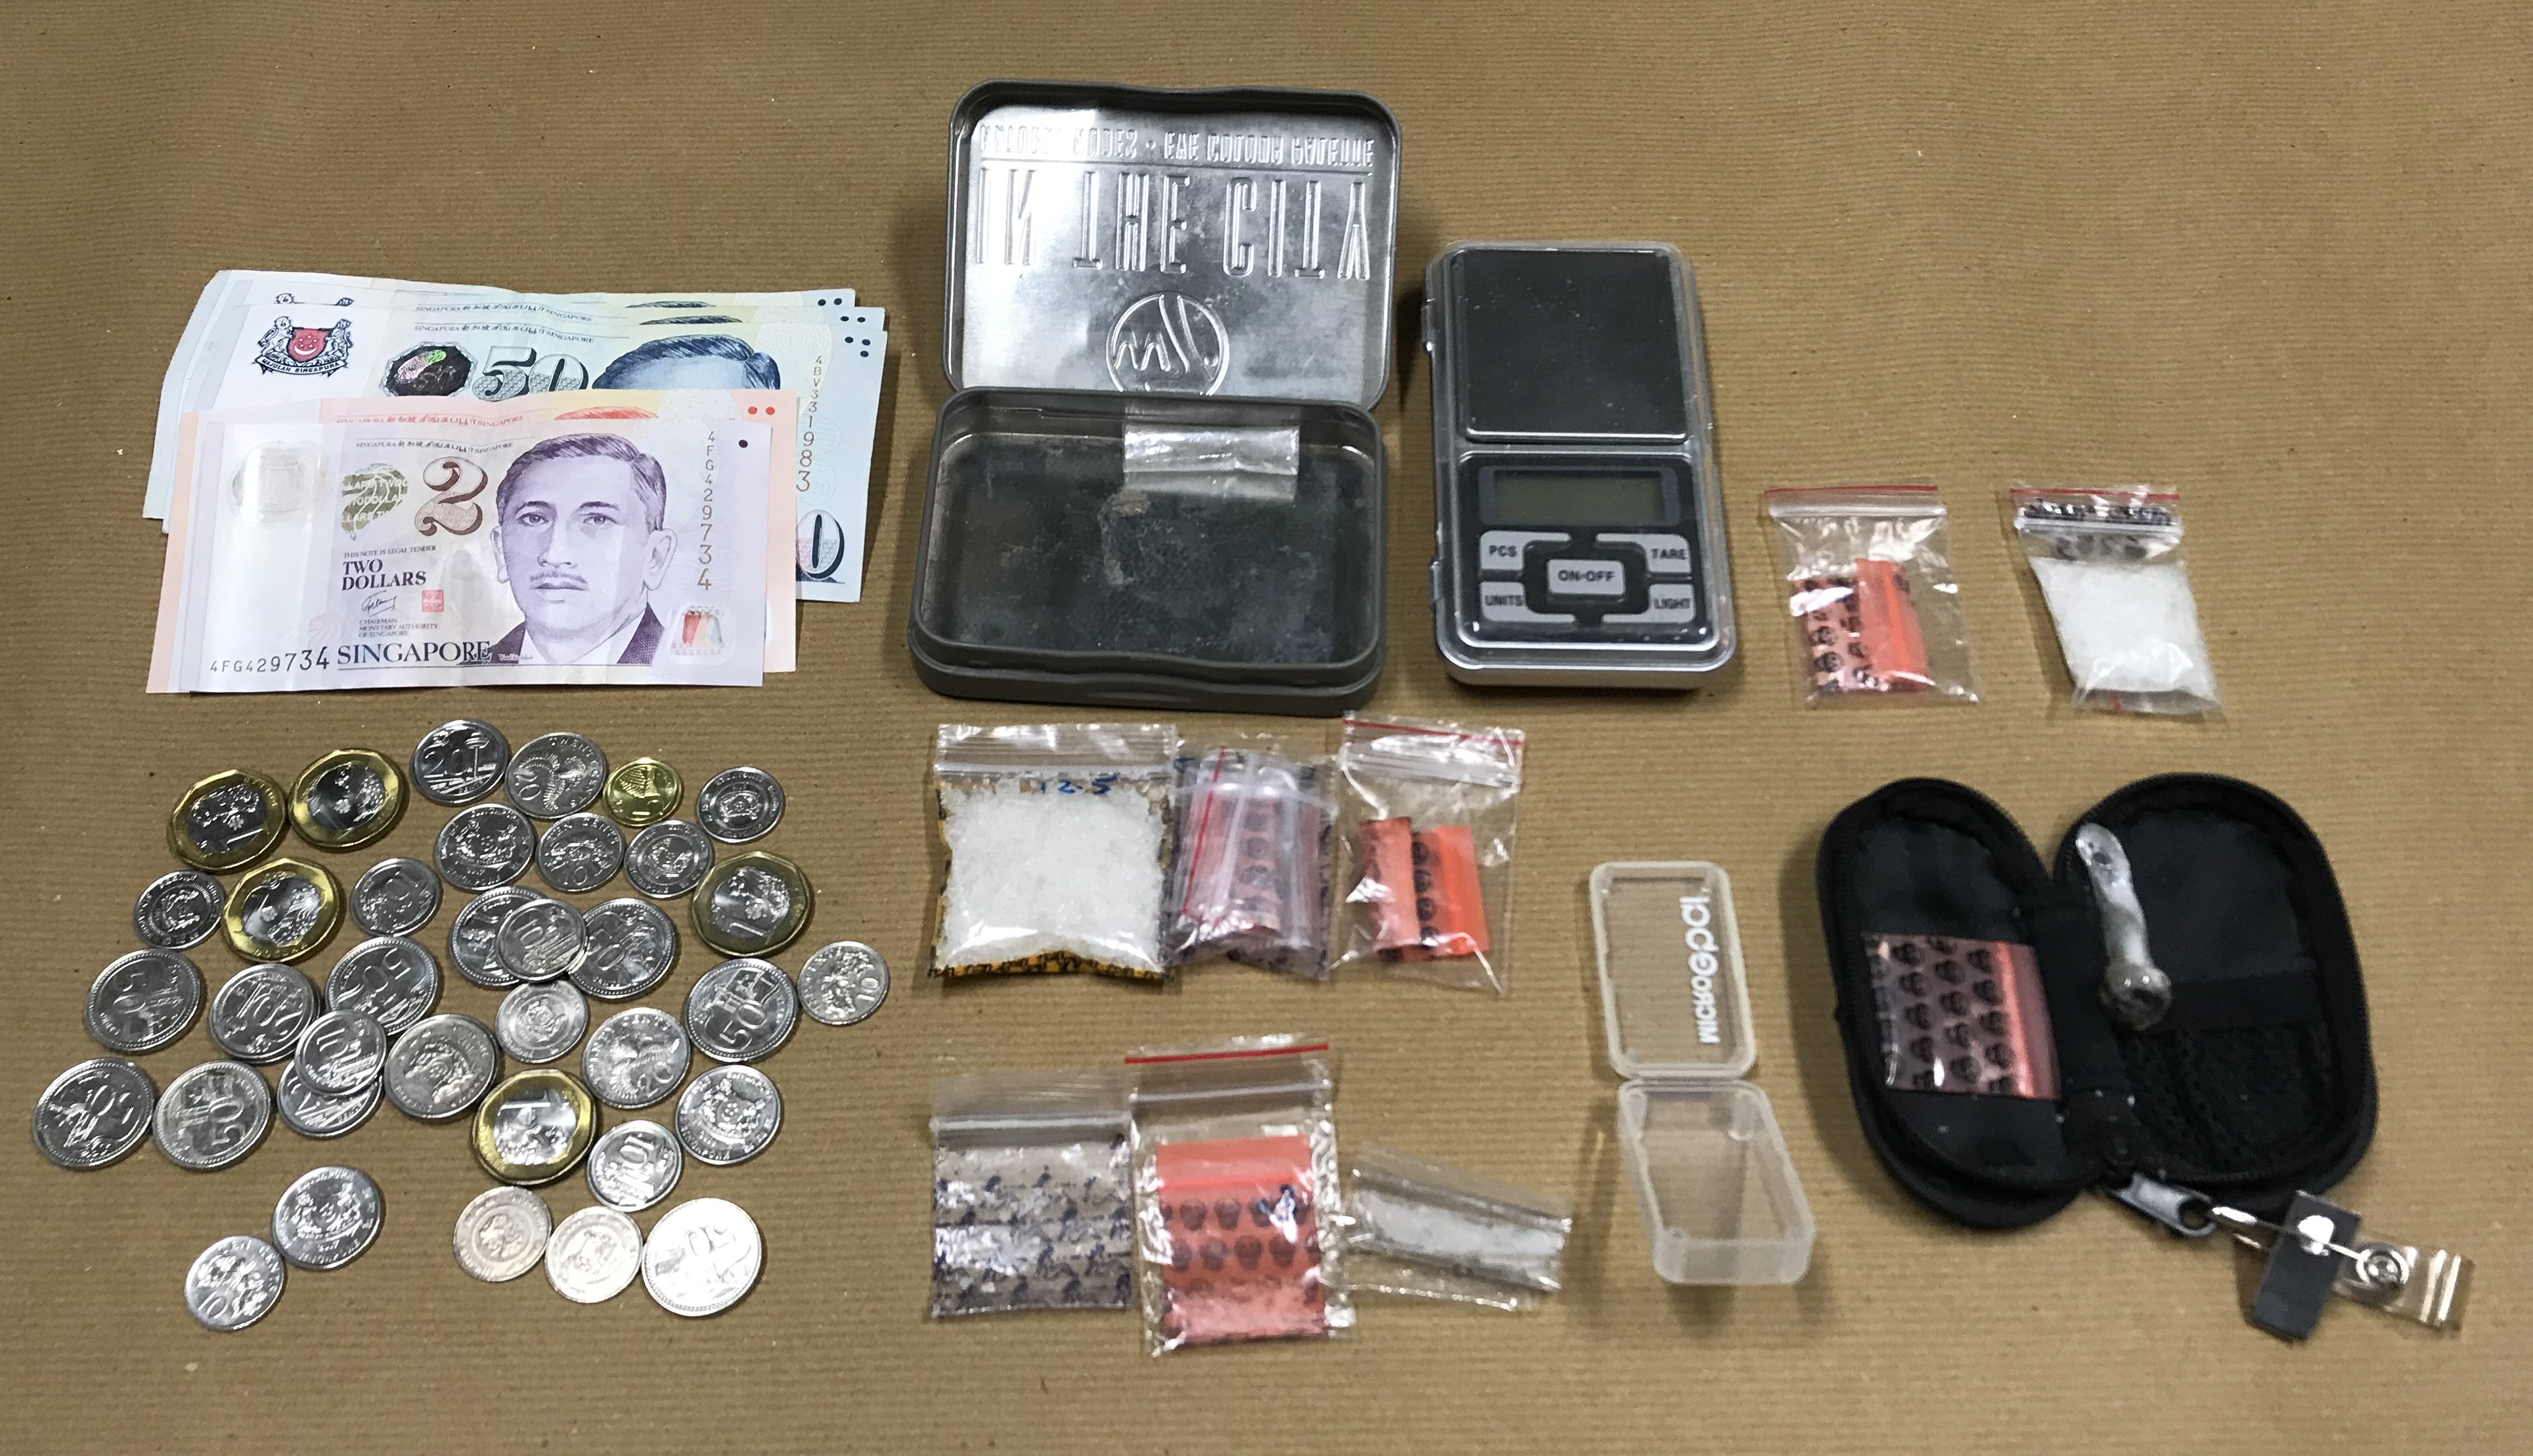 Cash and drugs seized